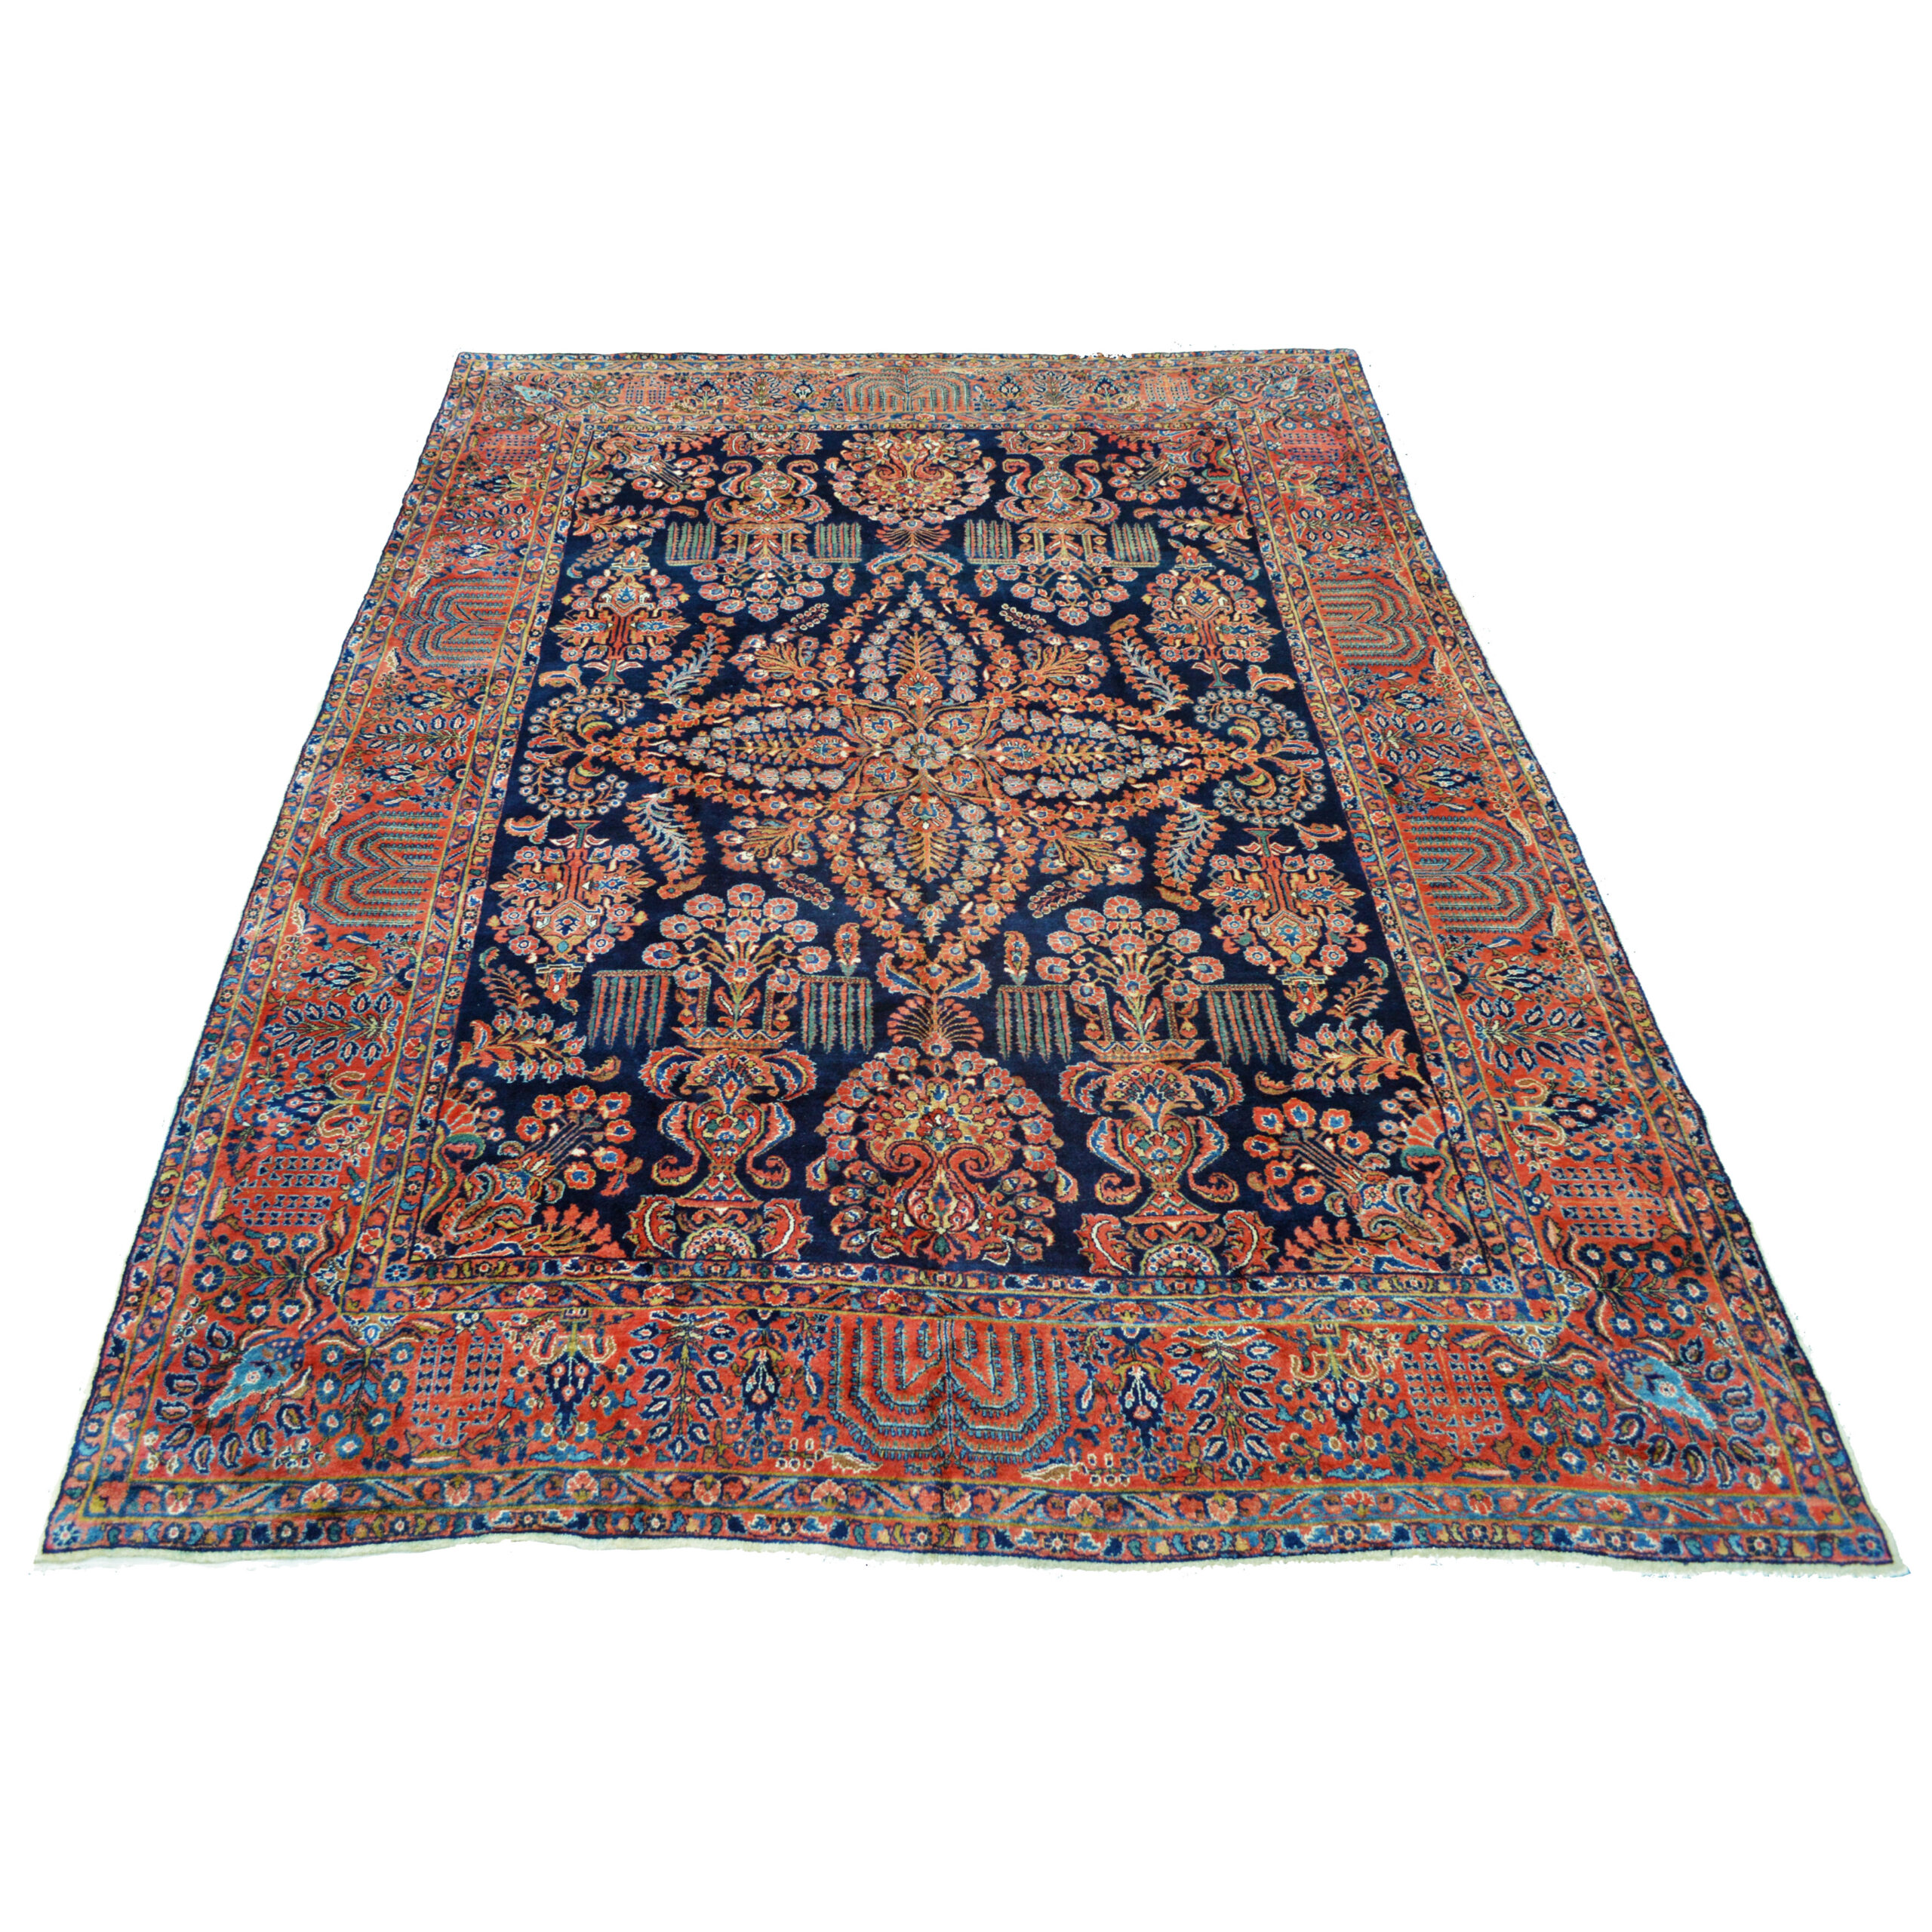 Antique Persian Mahajaran Sarouk carpet with stylized floral decoration on a navy blue field, Douglas Stock Gallery, antique Persian carpets, antique Orienral rugs Boston,MA area, Oriental rugs Brookline, Newton, Wellesley, Dover, Natick,MA area